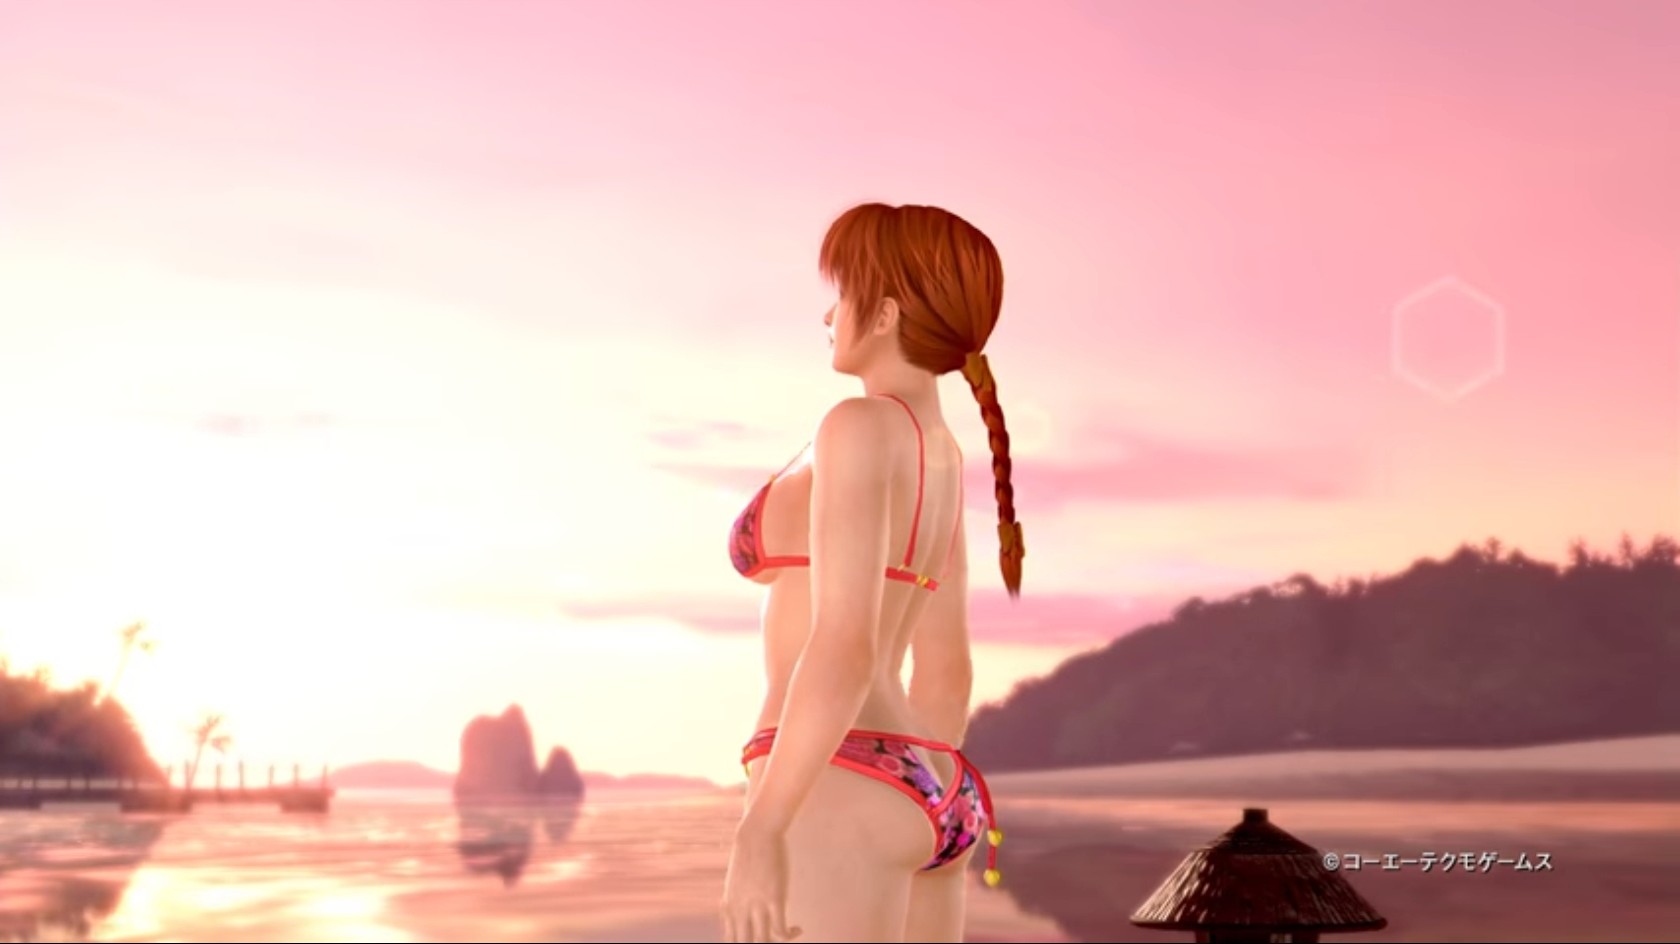 Dead or alive xtreme kasumi 12